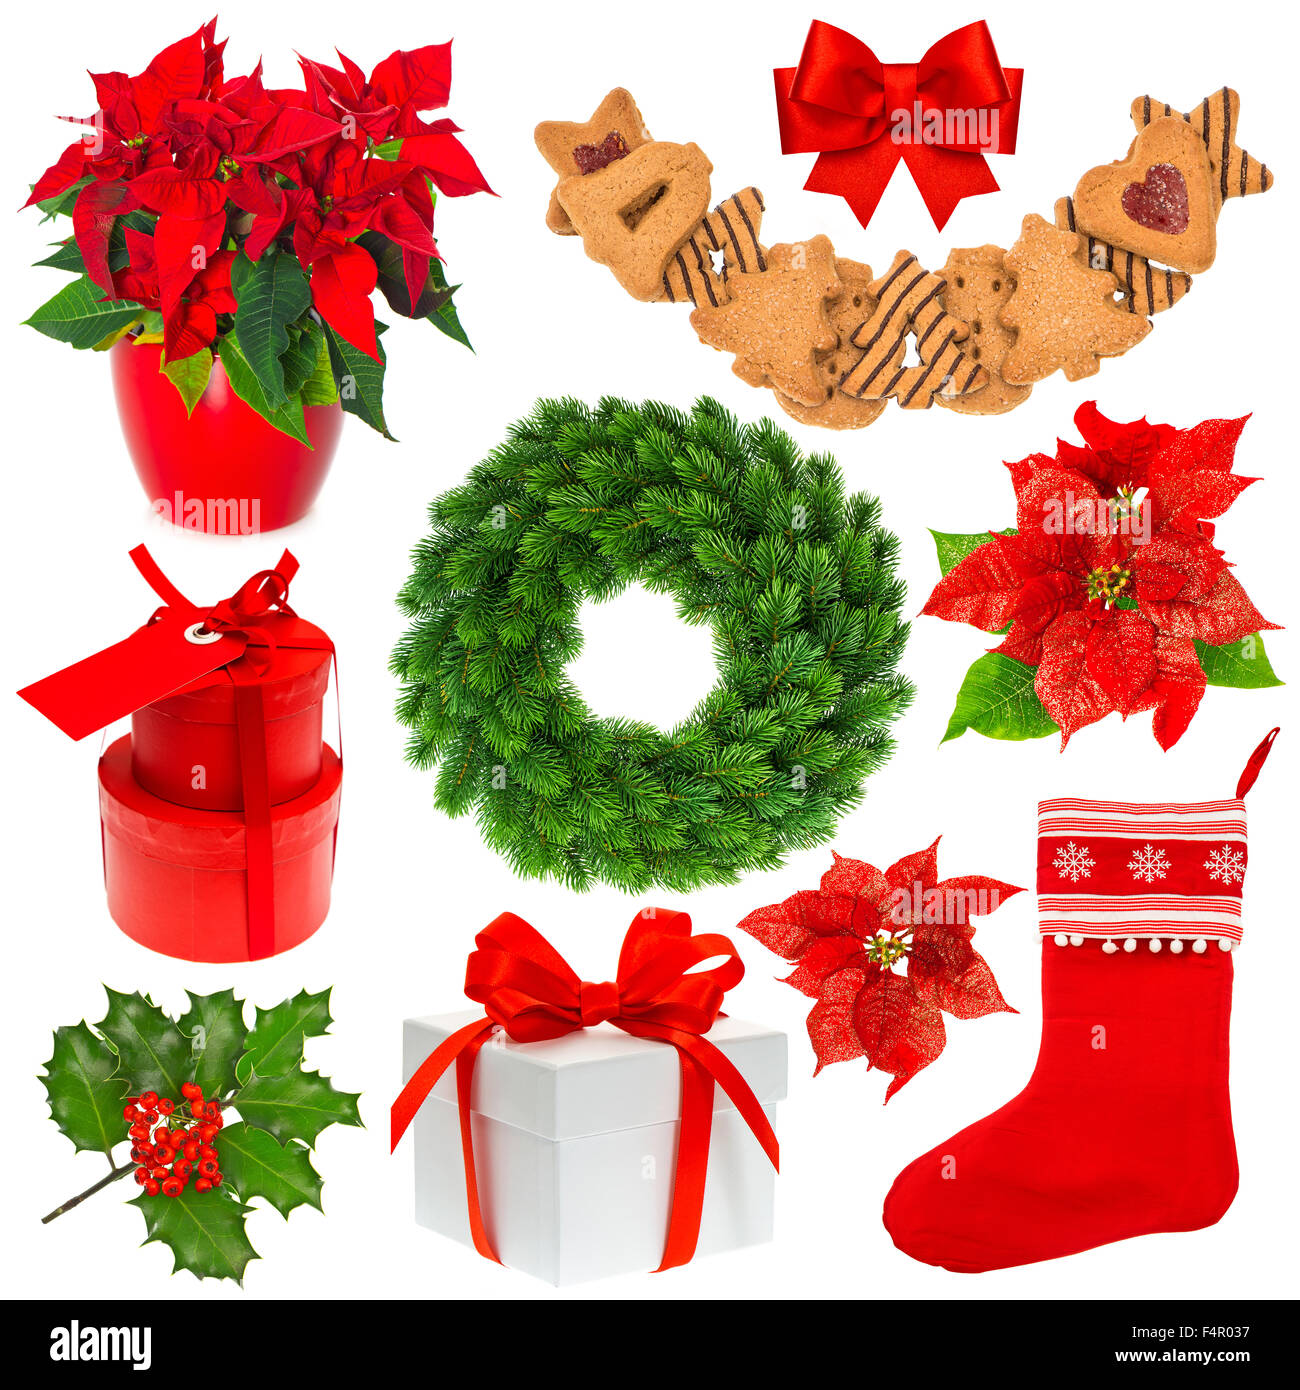 Christmas collection isolated on white background. Stocking, gifts, wreath, cookies, red flower. Set of decoration objects Stock Photo